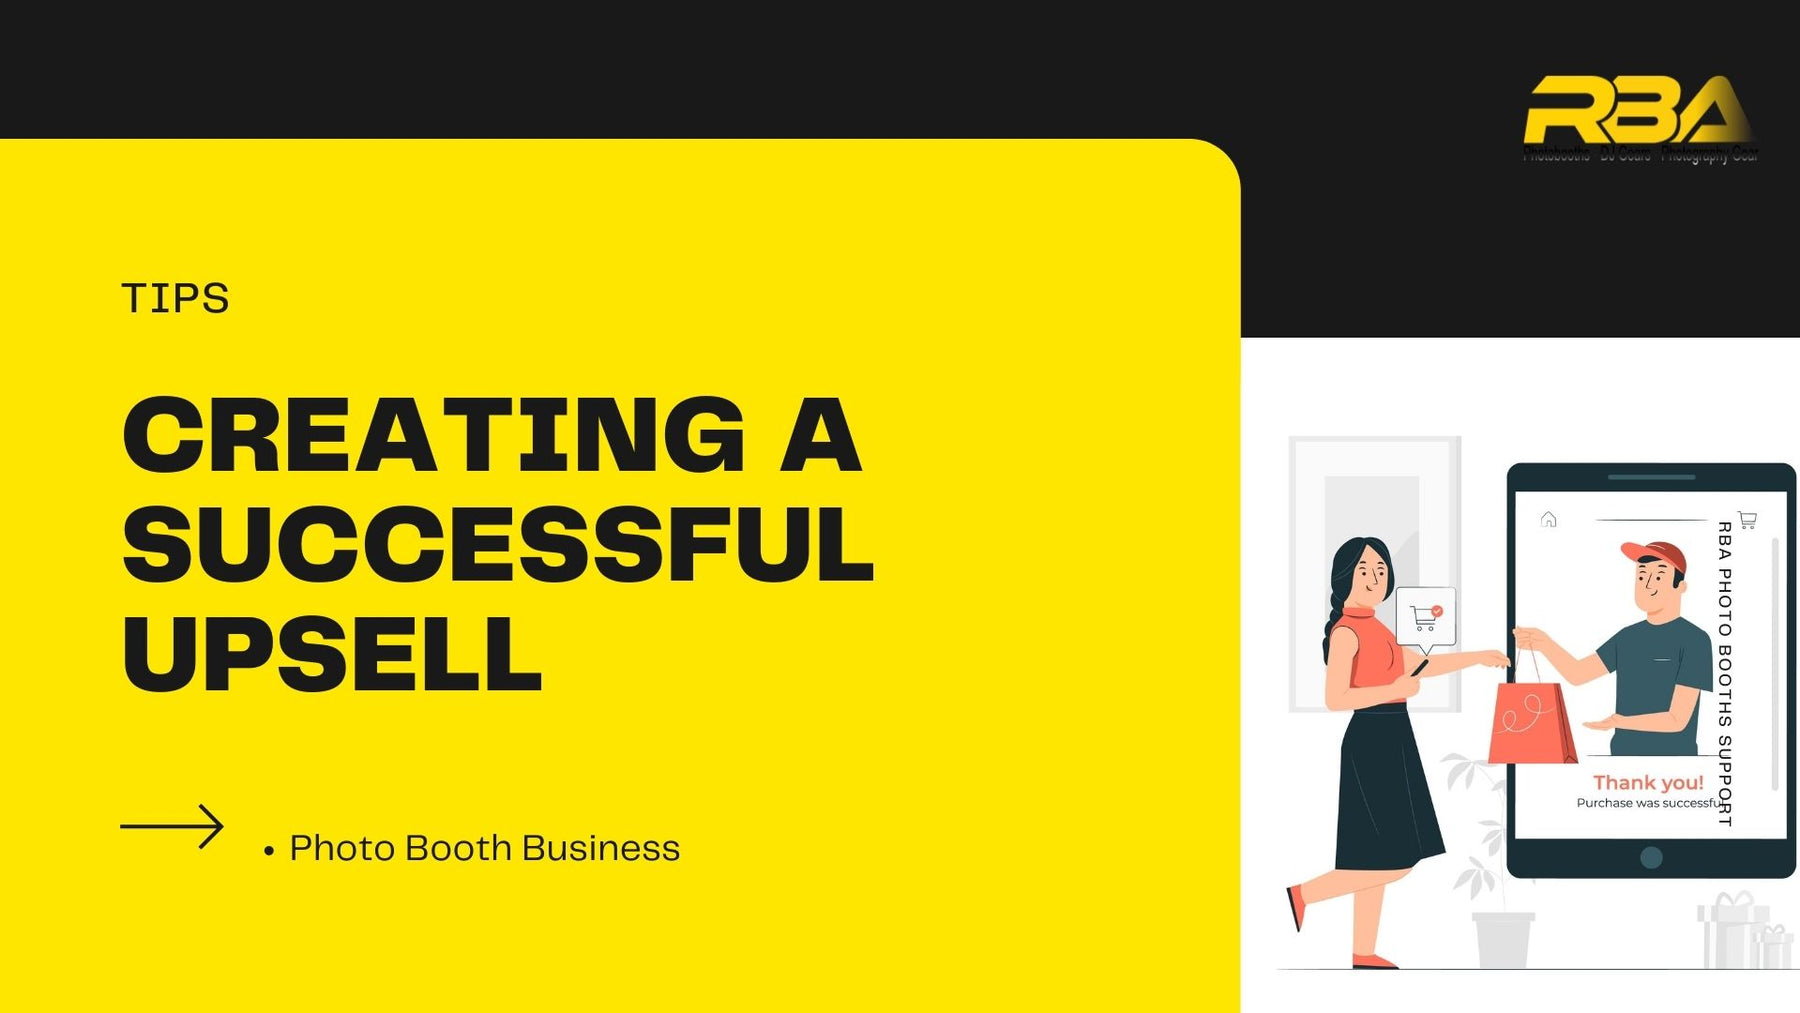 Photo Booth Business: Creating A Successful Upsell